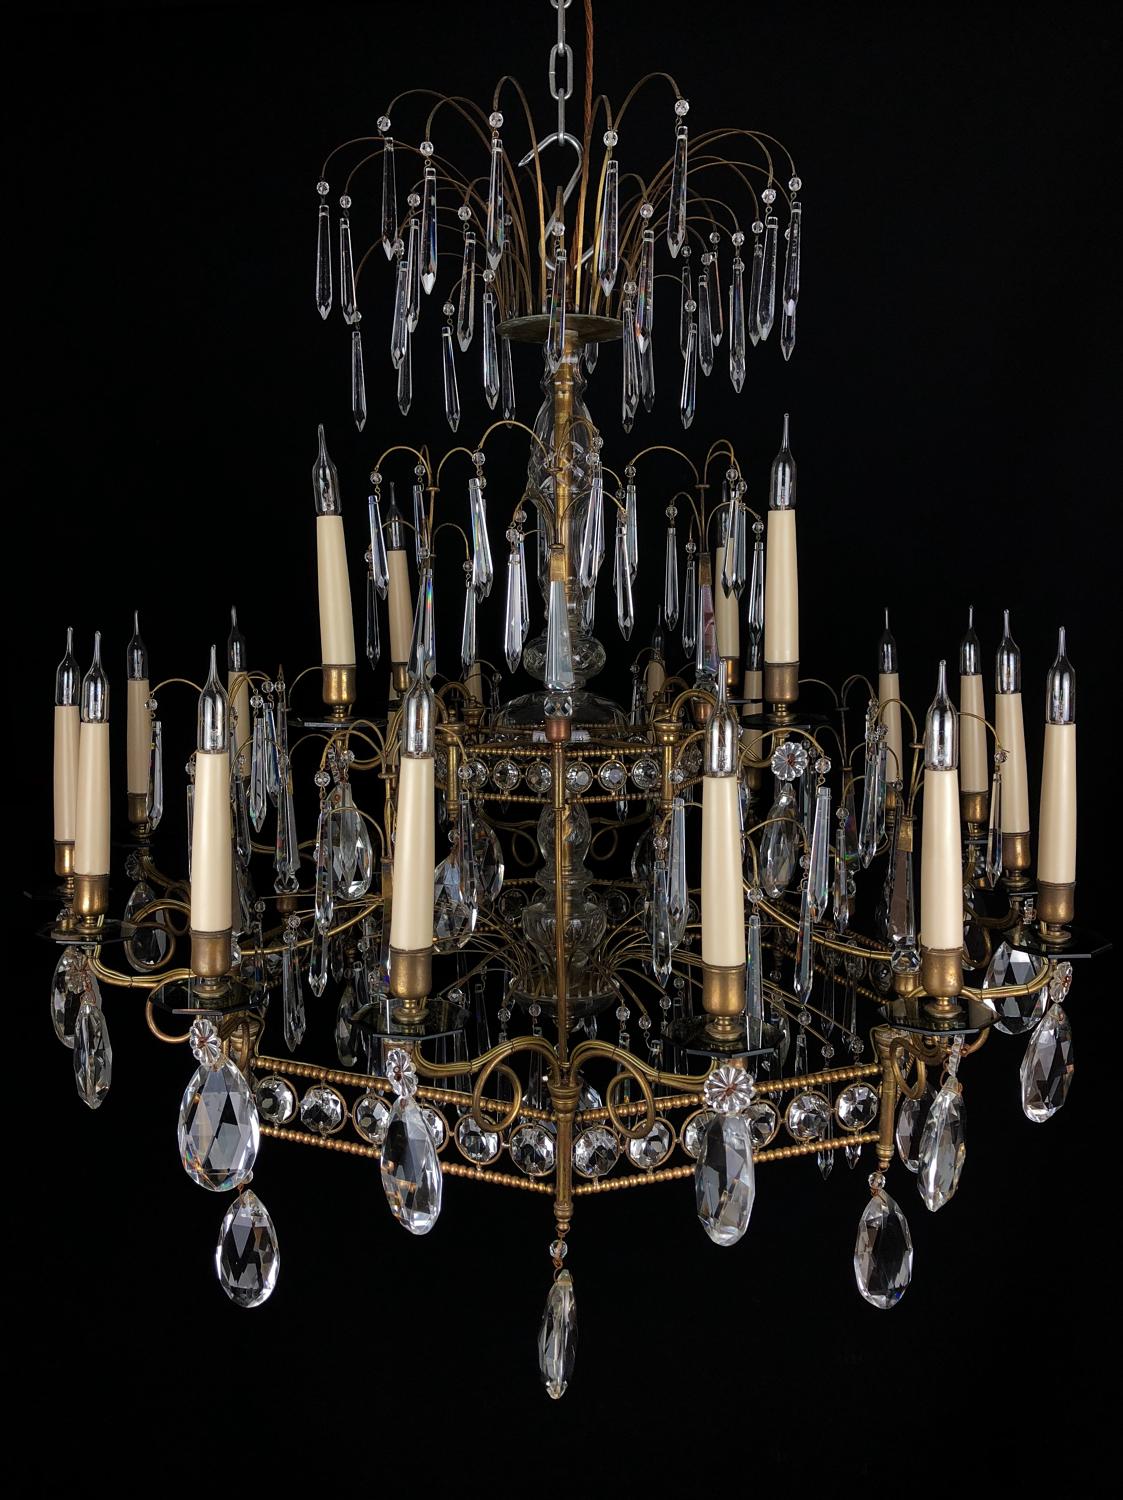 A floating 'fountain' chandelier